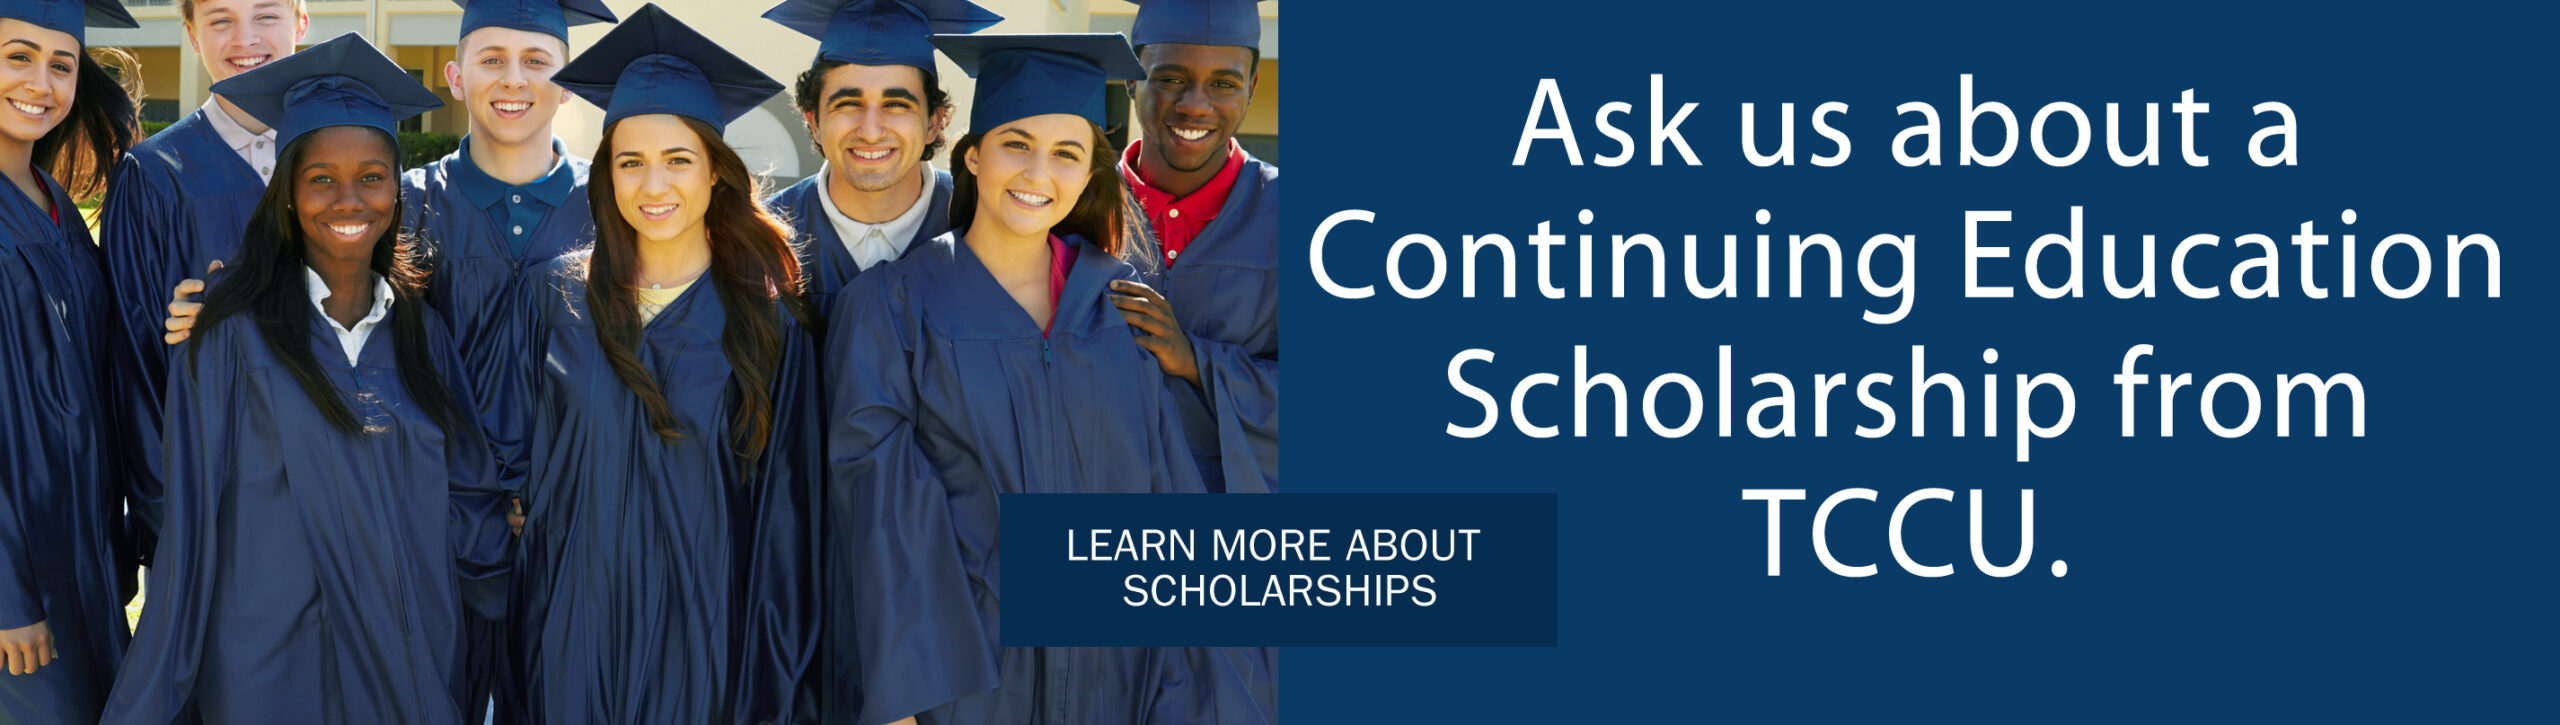 students wearing graduation caps. Ask us about a continuing education scholarship from TCCU